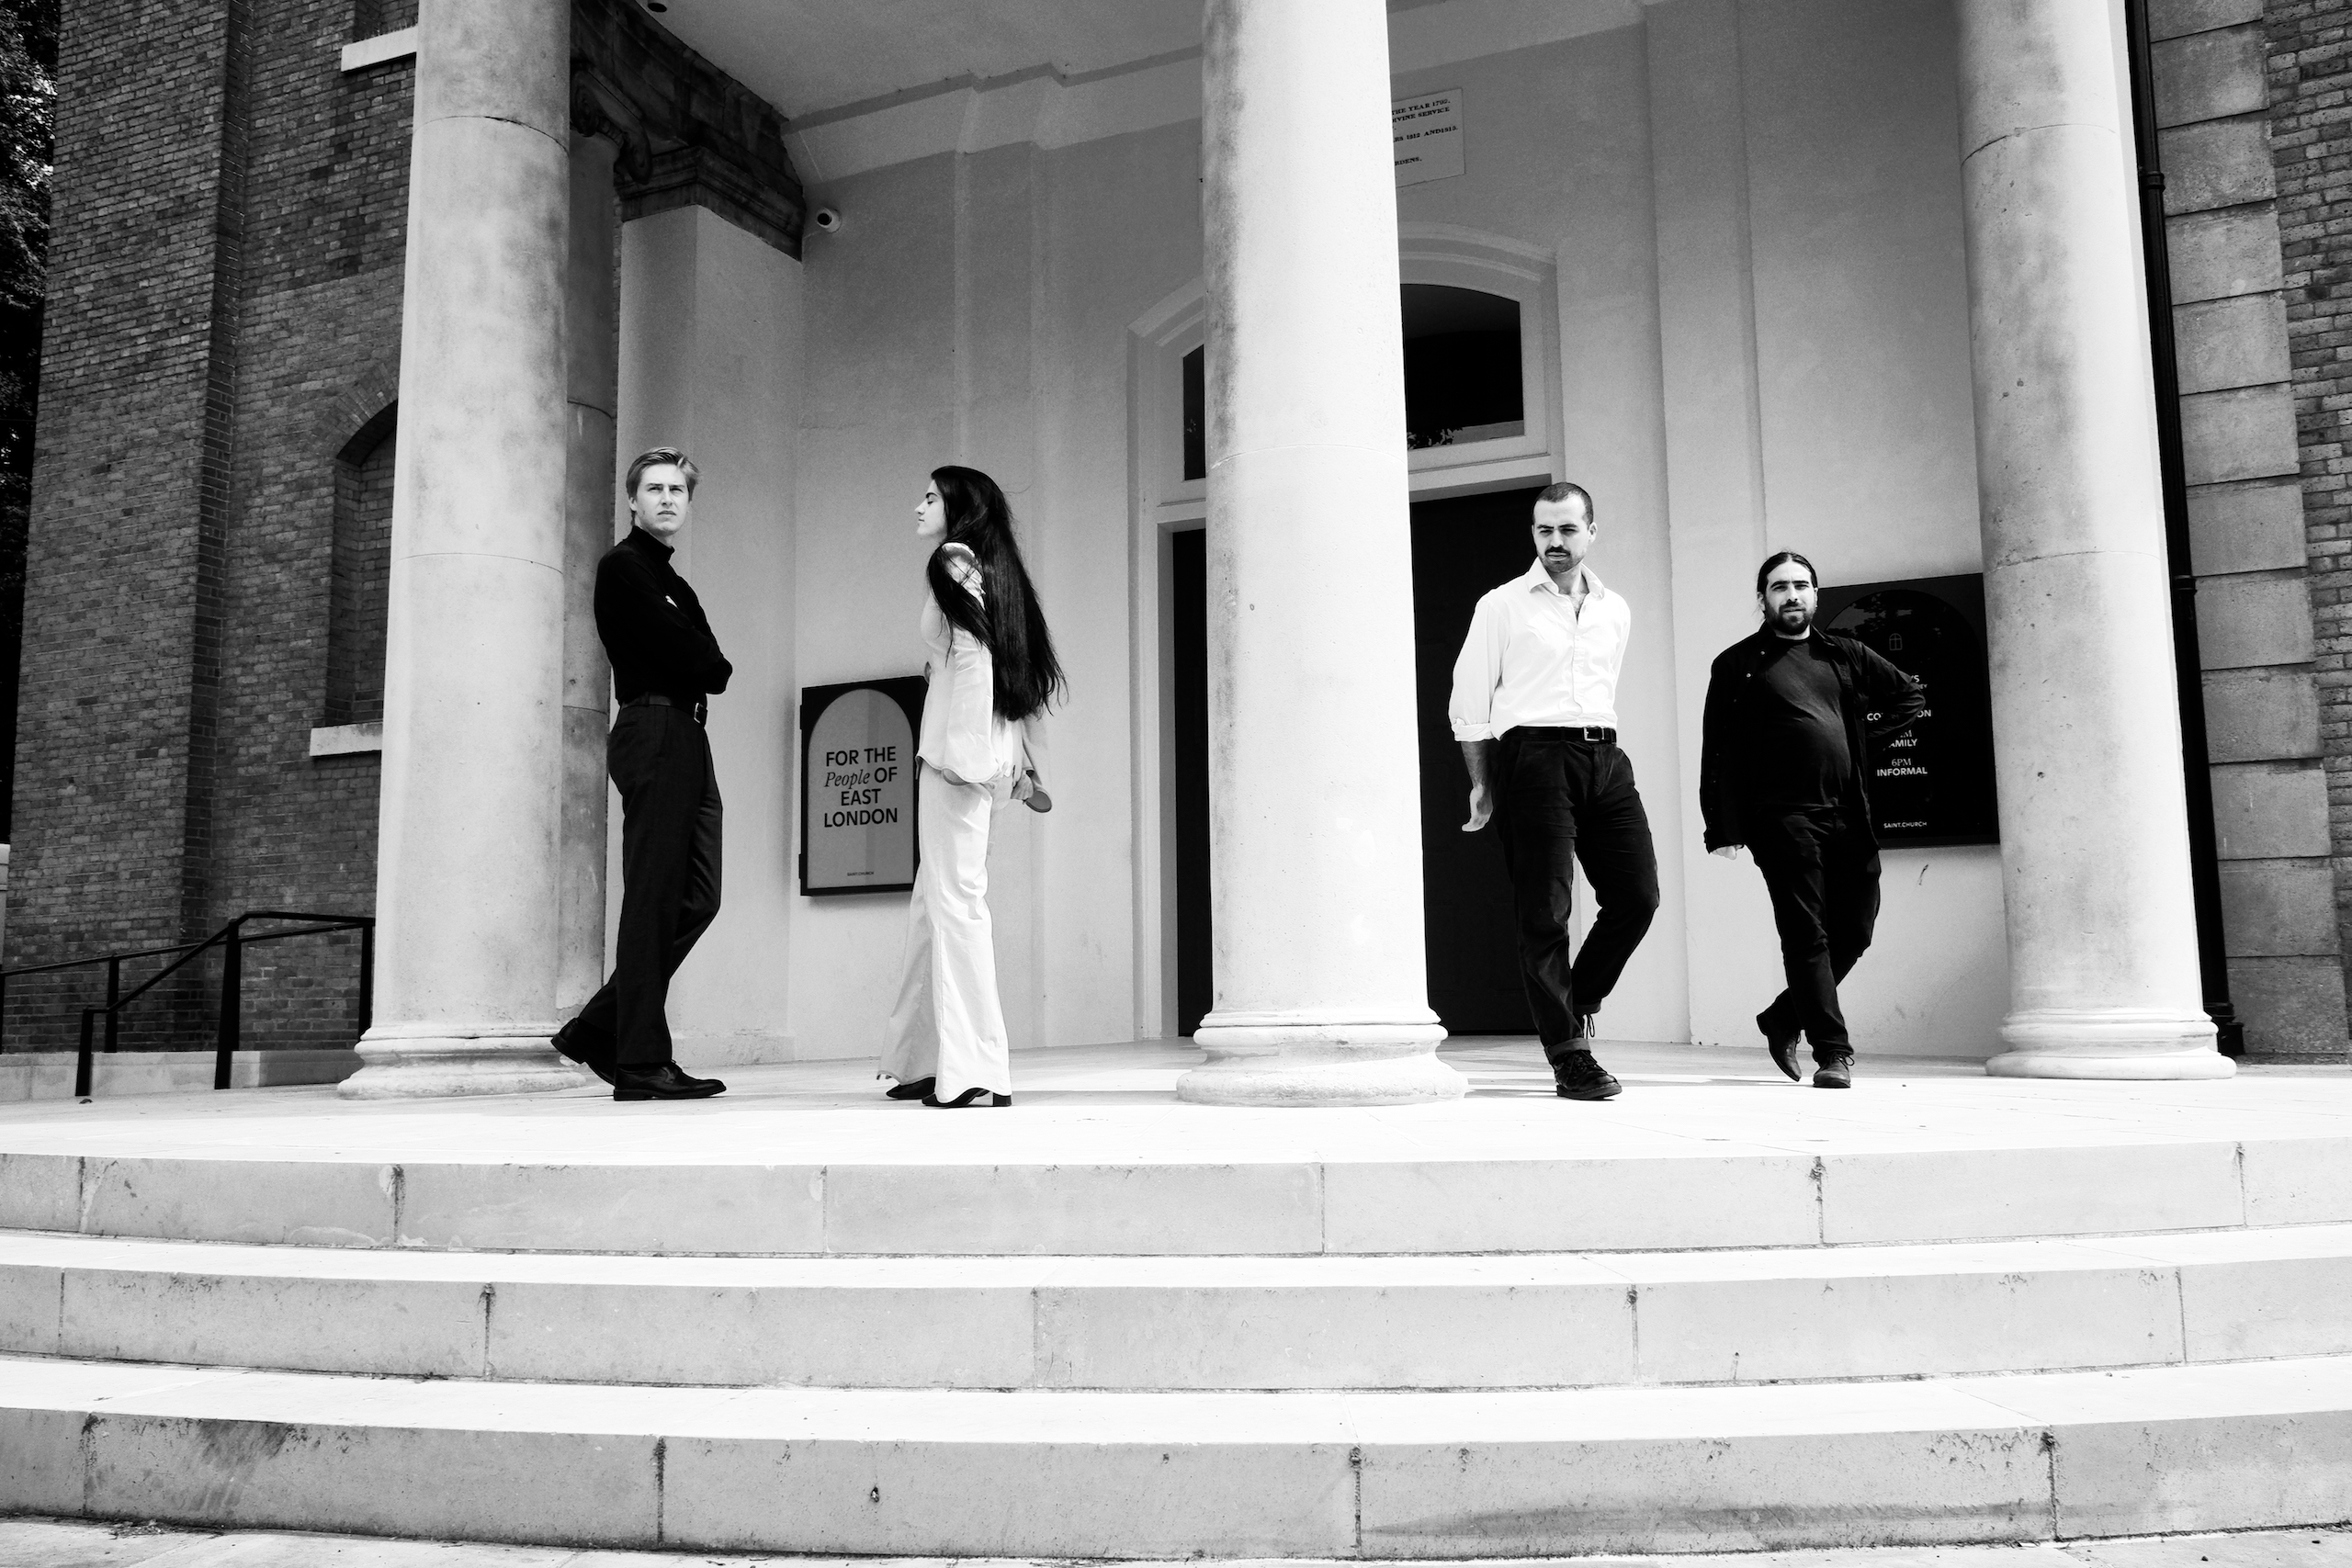 The four members of Modern Woman in front of an East London public building, in black and white